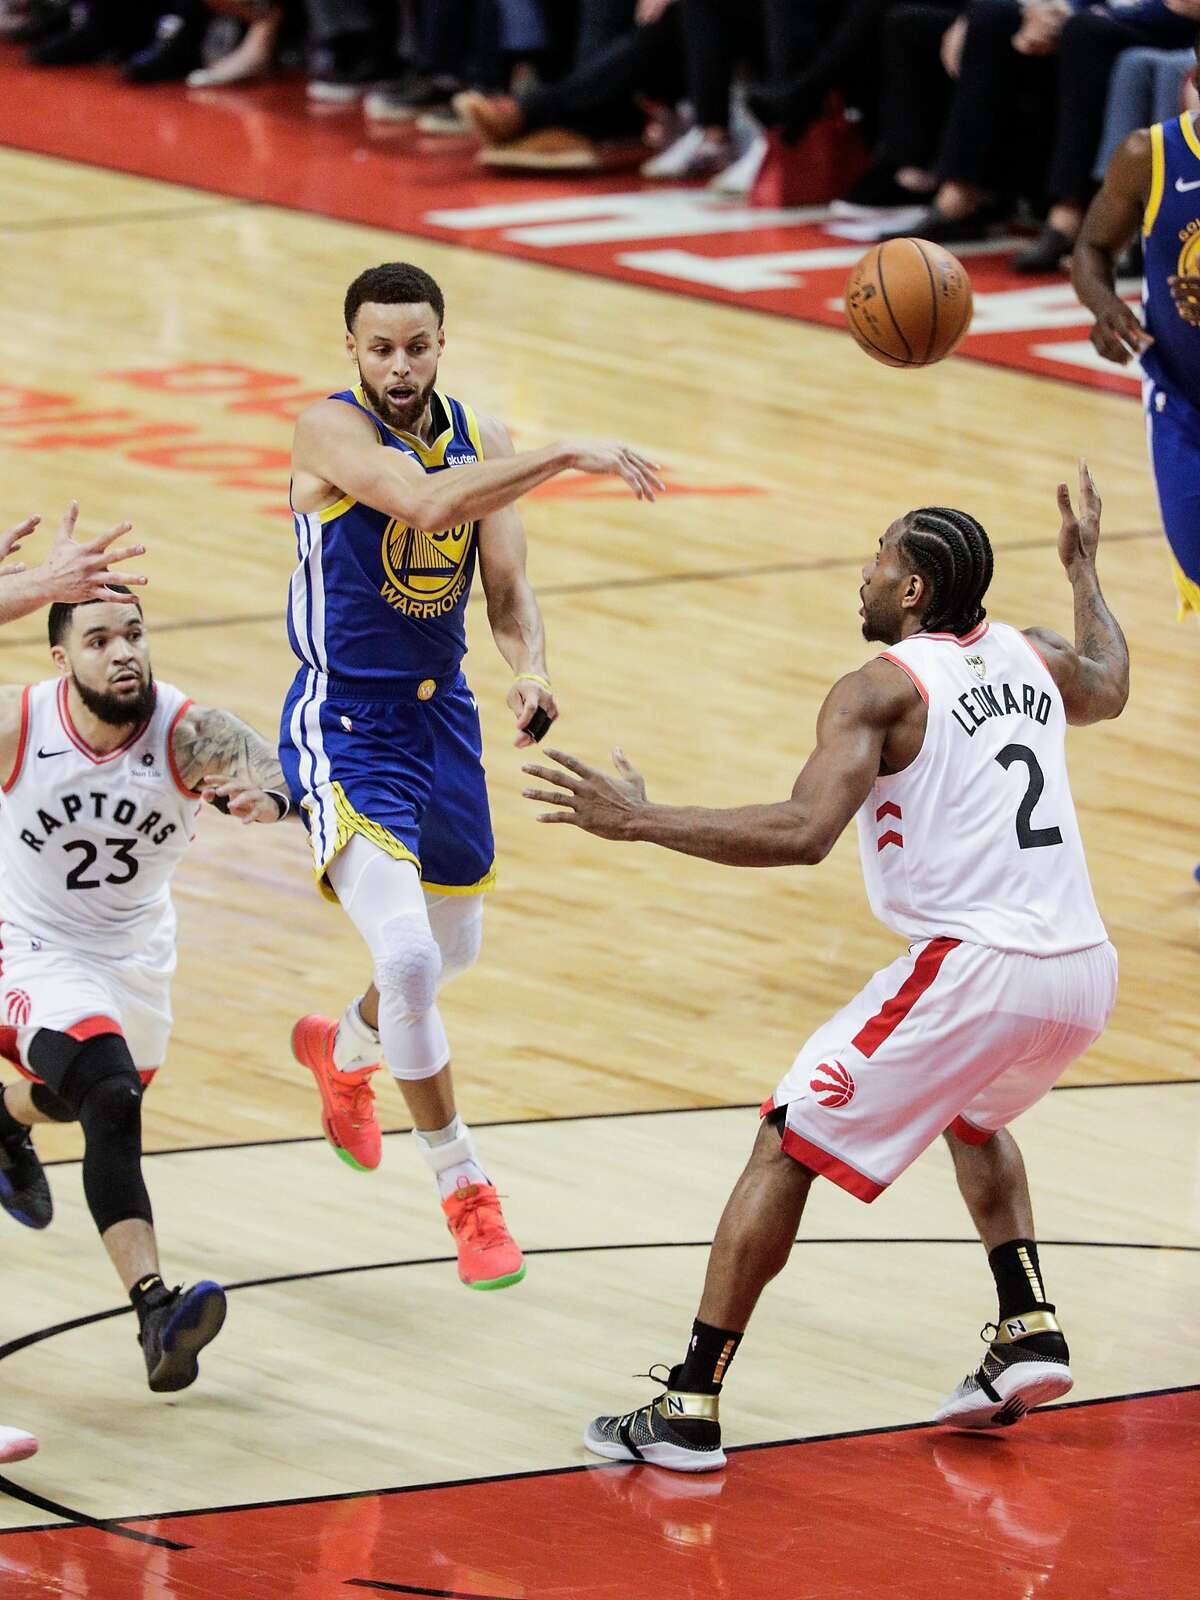 Golden State Warriors’ Stephen Curry throws a no-look pass past Toronto Raptors’ Kawhi Leonard in the third quarter during game 2 of the NBA Finals between the Golden State Warriors and the Toronto Raptors at Scotiabank Arena on Sunday, June 2, 2019 in Toronto, Ontario, Canada.